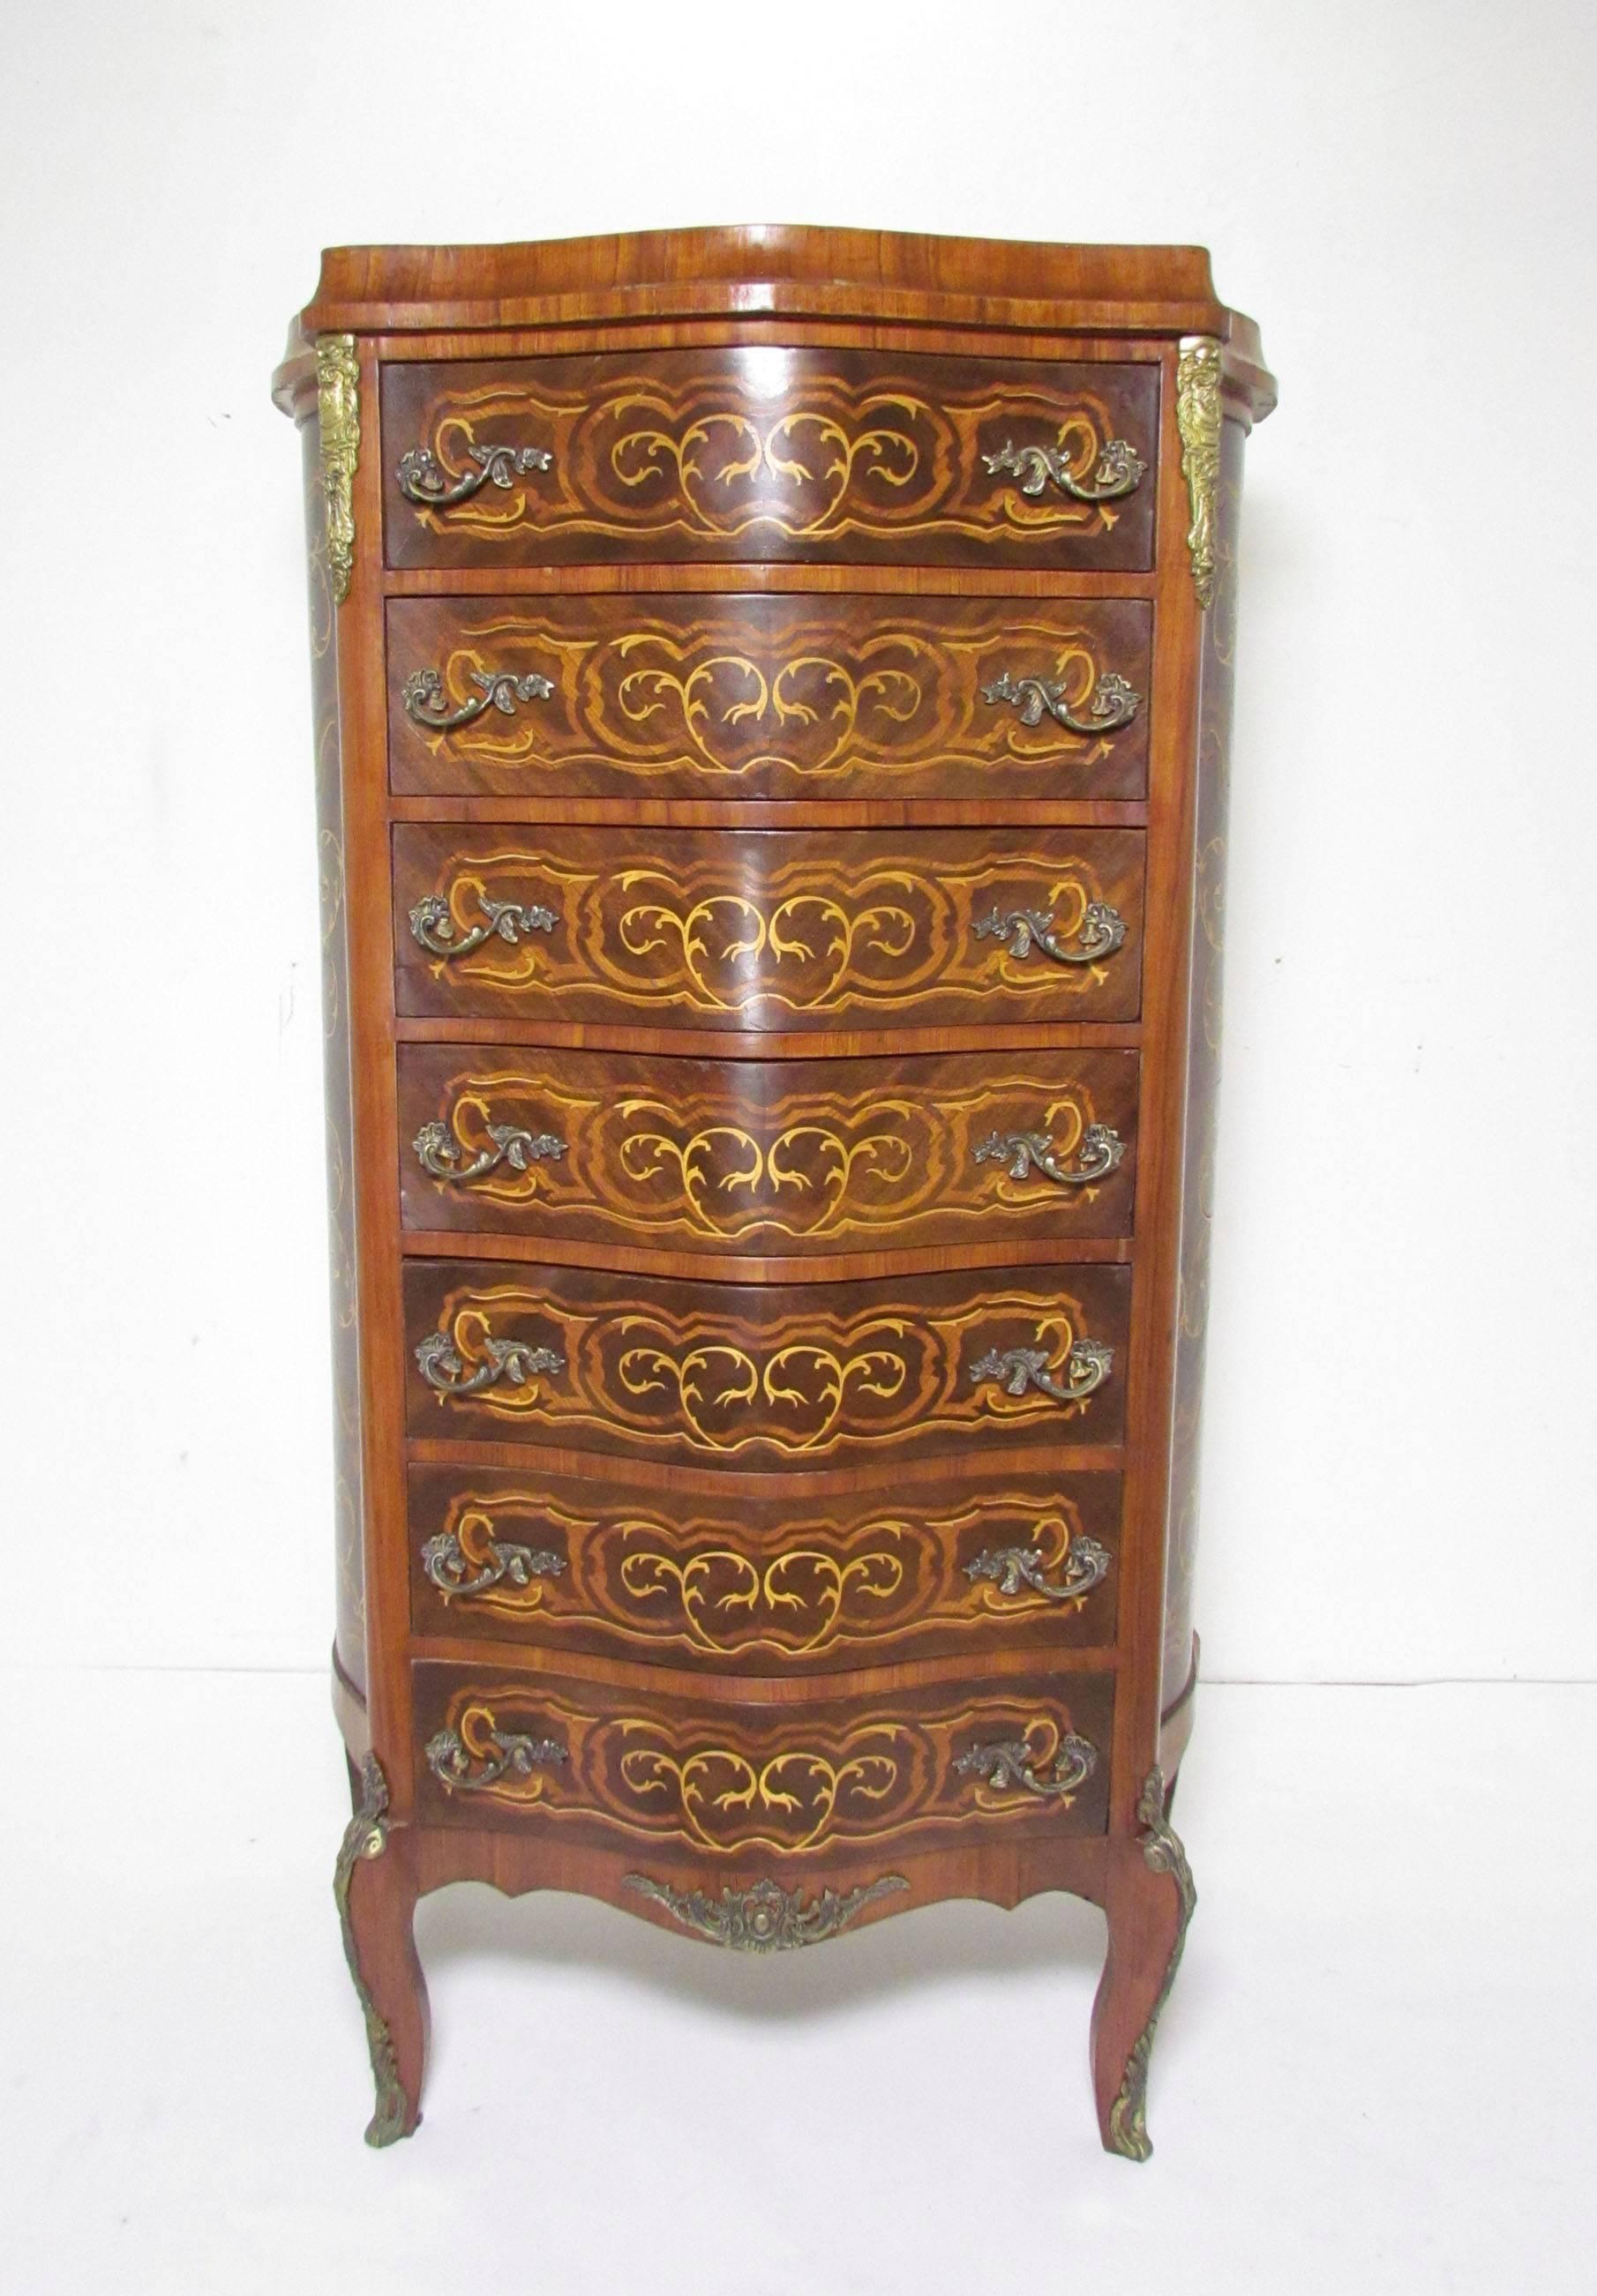 Louis XV style semainier dresser with brass-mounted ormolu and elaborate marquetry inlay, circa early 20th century.